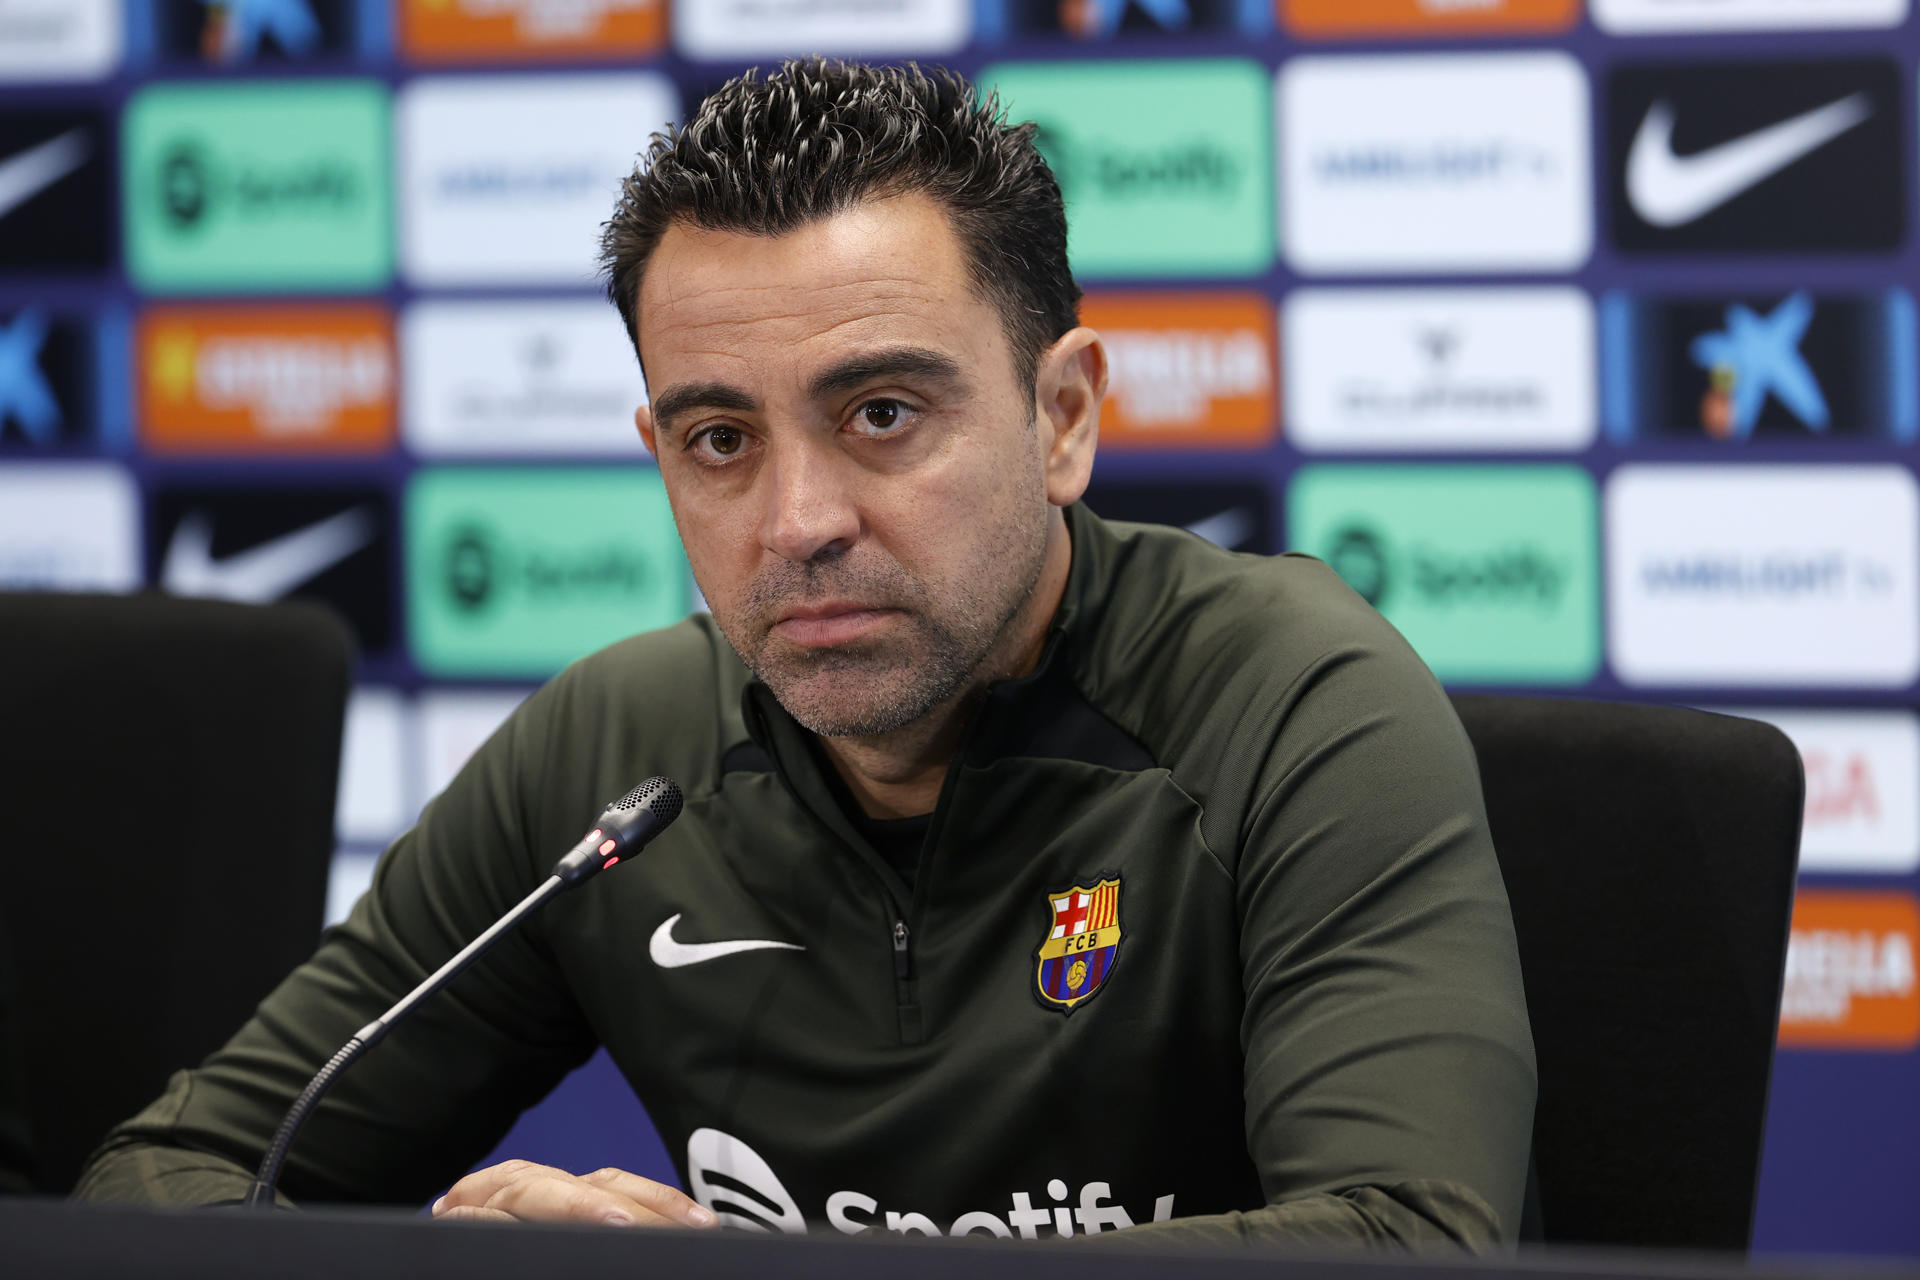 Xavi confirmed he would leave Barca for free in case of departure